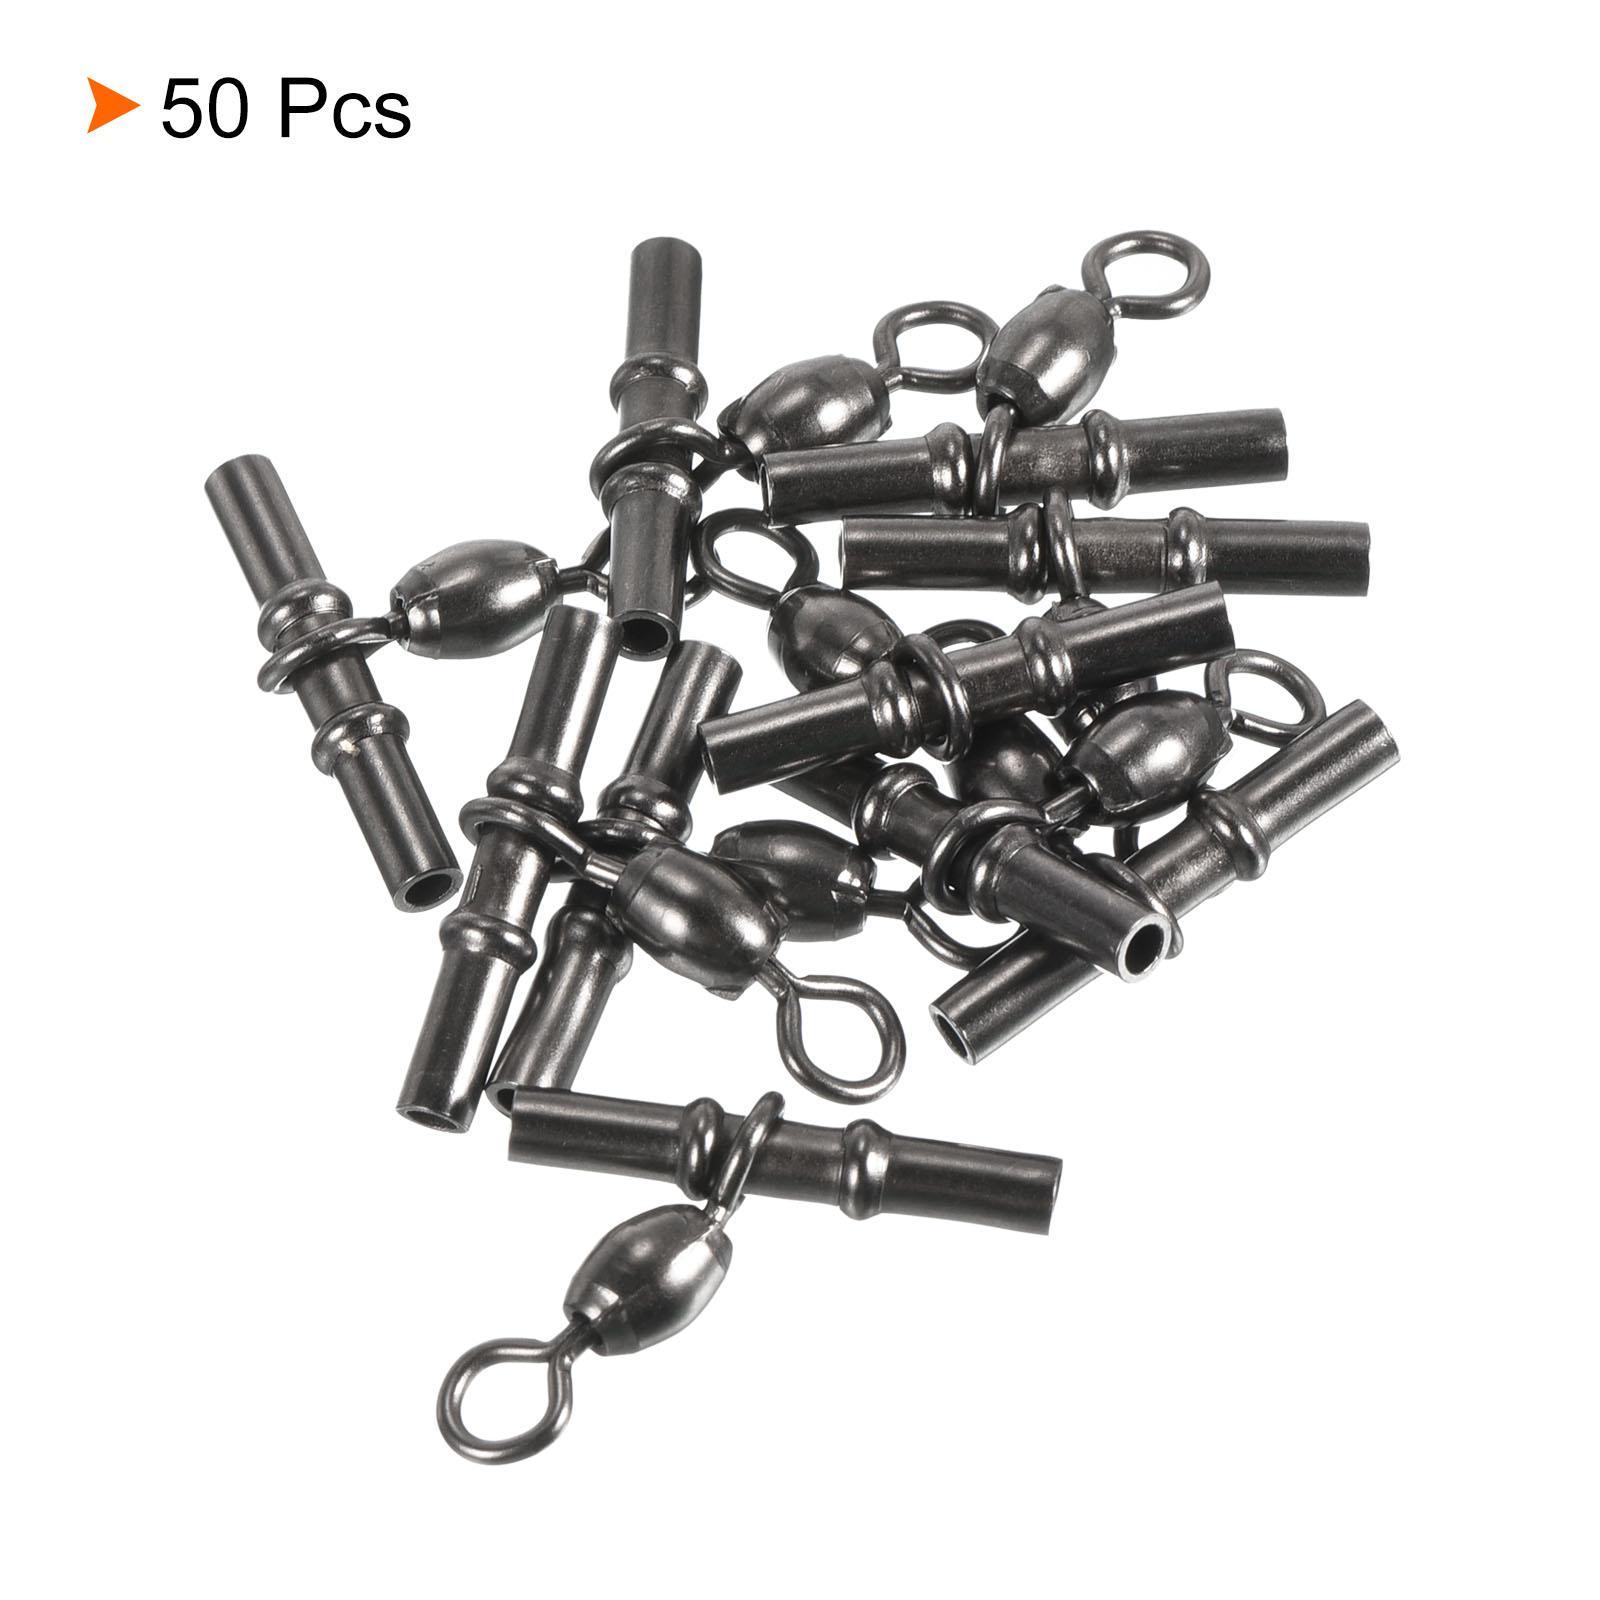 Sleeve Swivel, 97lb Stainless Steel Cross Line 3 Way Fishing Terminal Tackle, Black 50 Pack - image 3 of 6